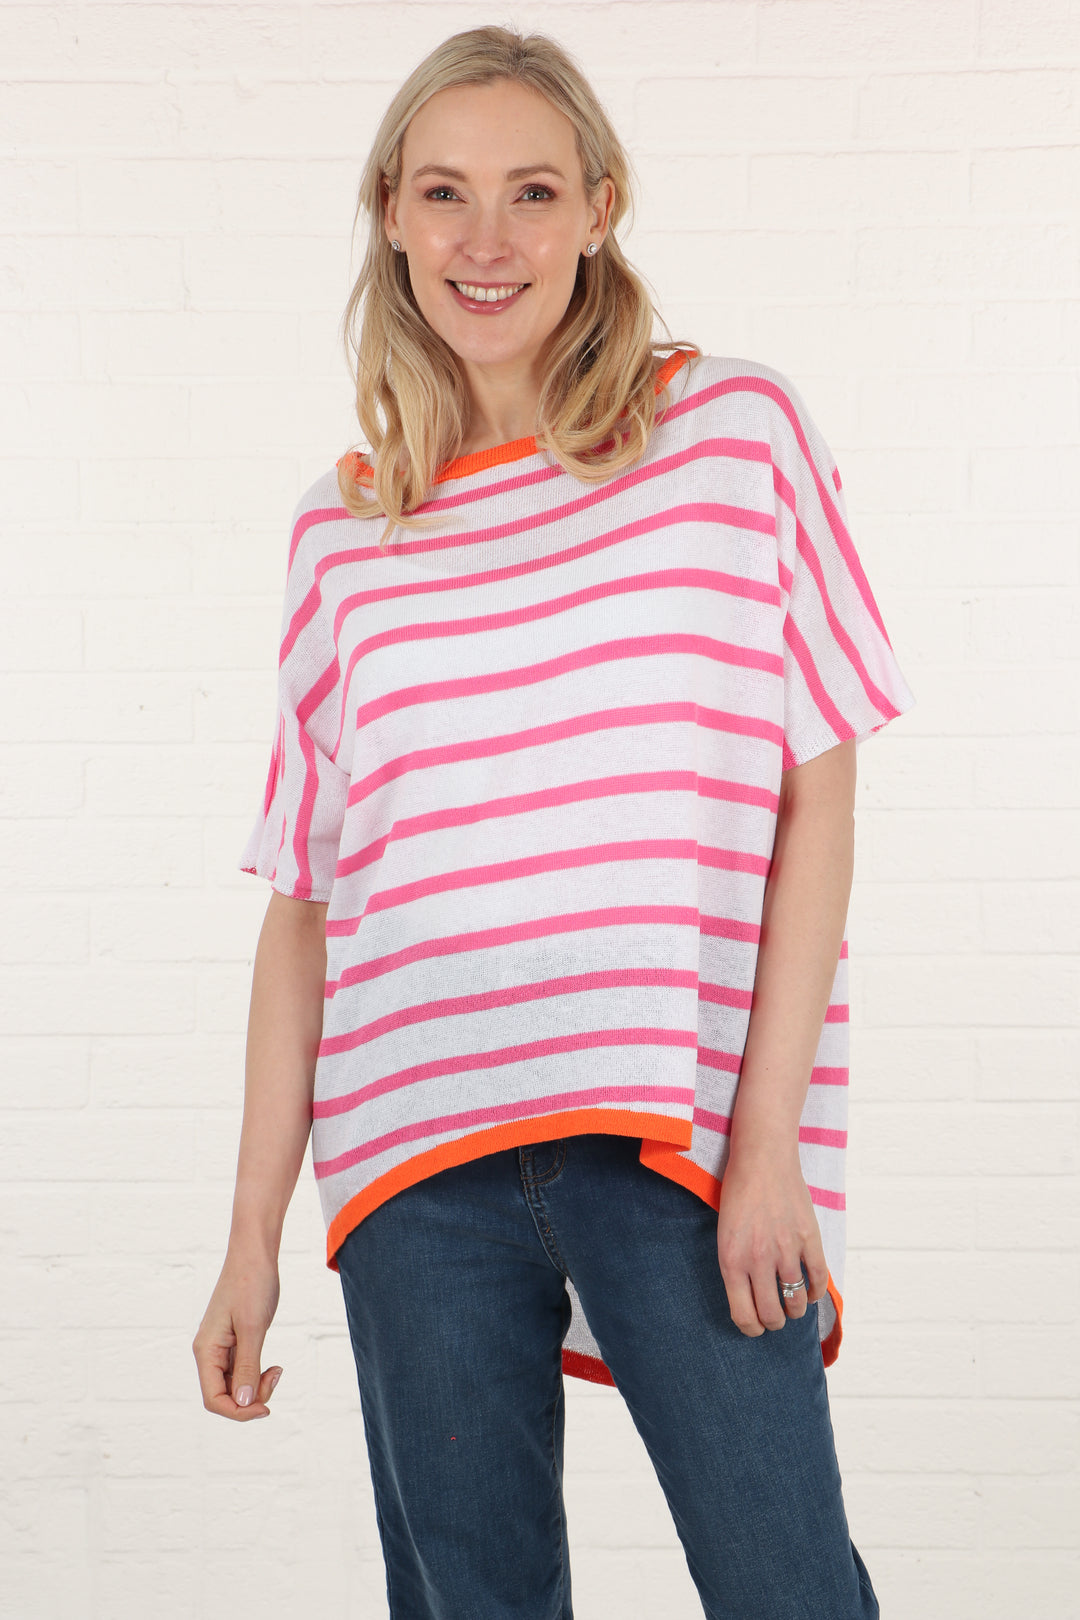 Striped Short Sleeve Cotton Knitted Top with Contrasting Trim in White Orange and Fuchsia